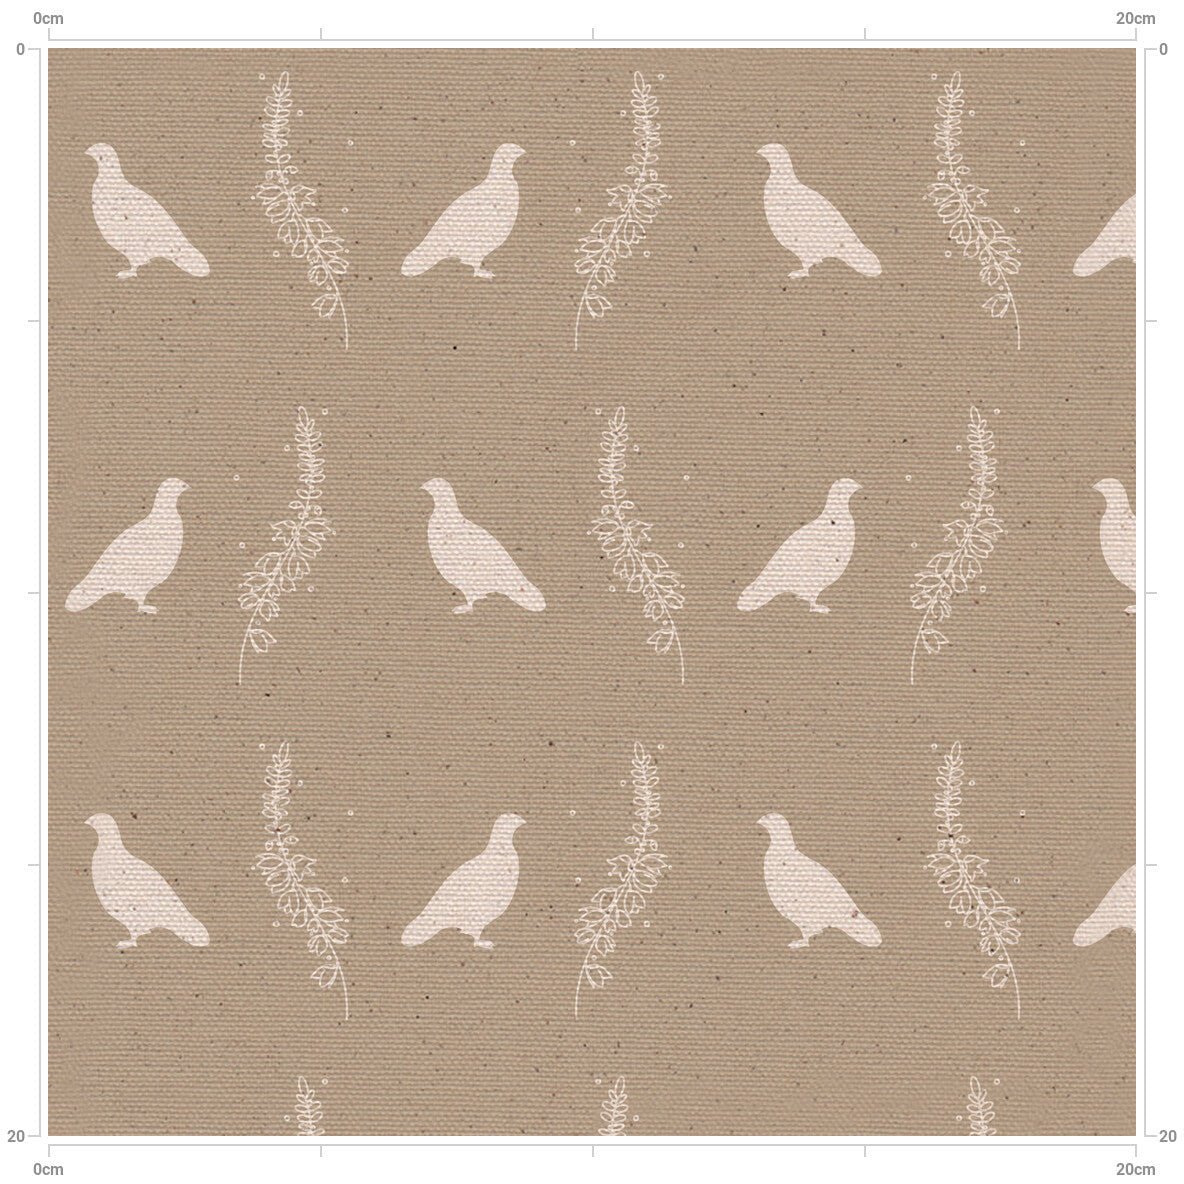 Grouse & Heather Solid Background - F&B Crafts - F&B Designs